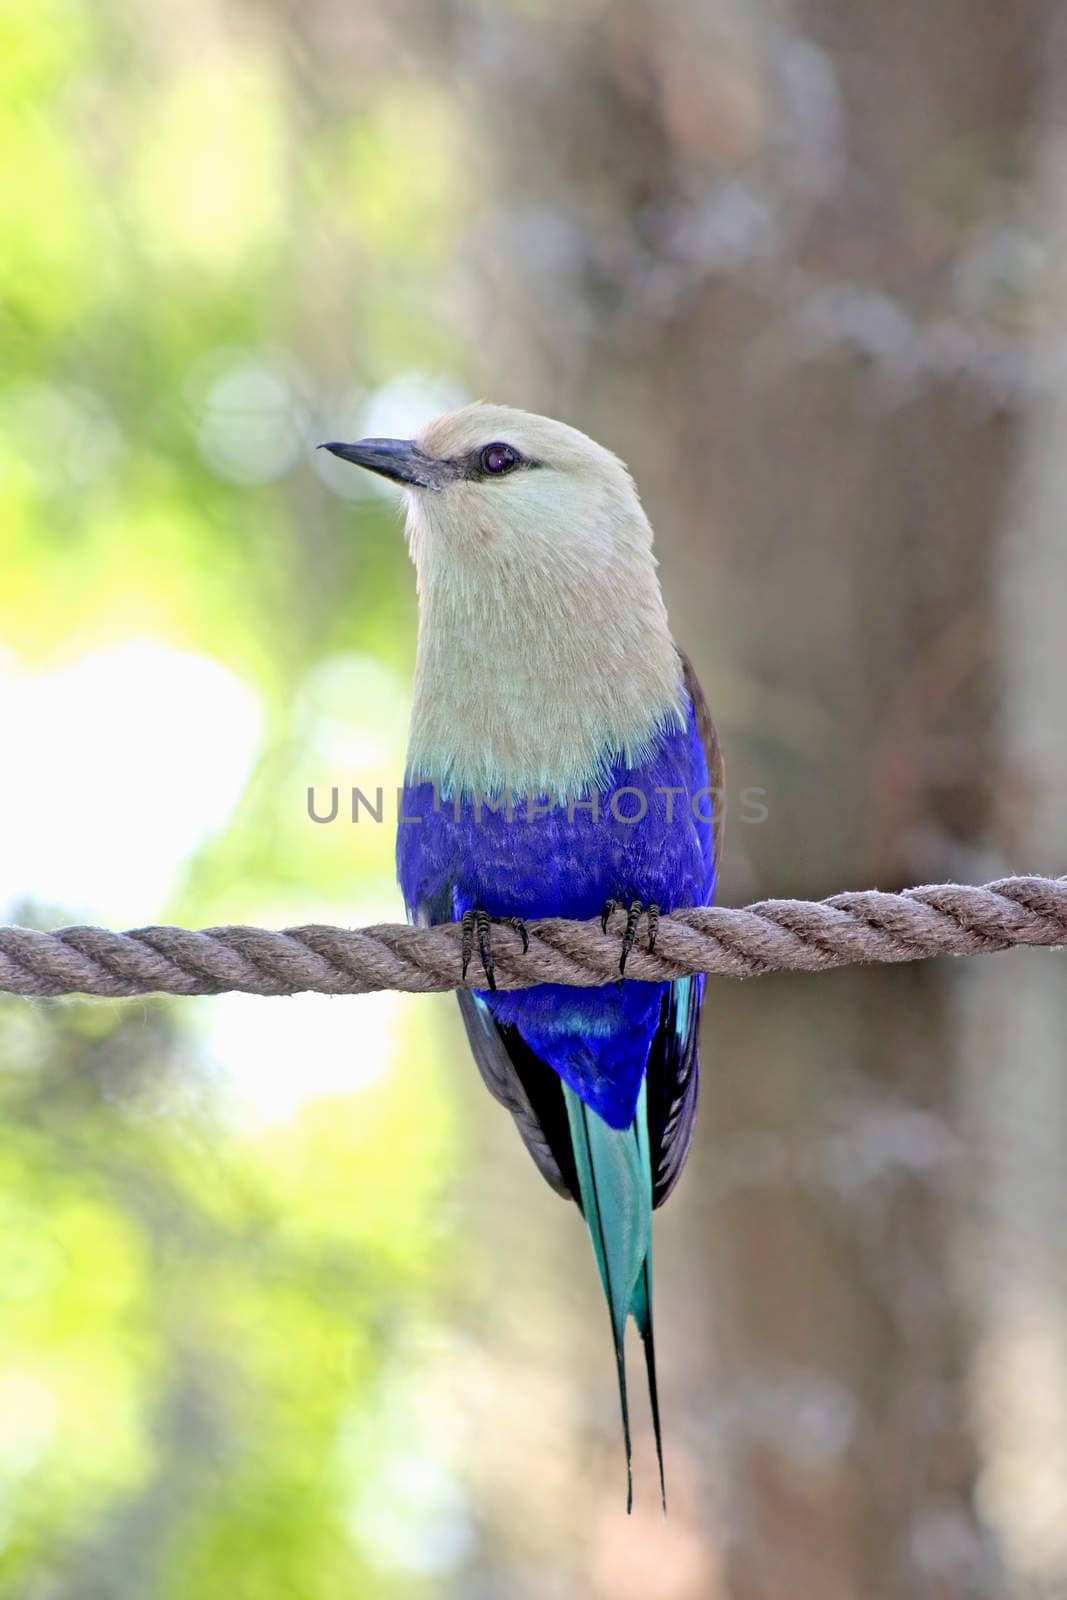 A bird with blue and white feathers perched on a rope